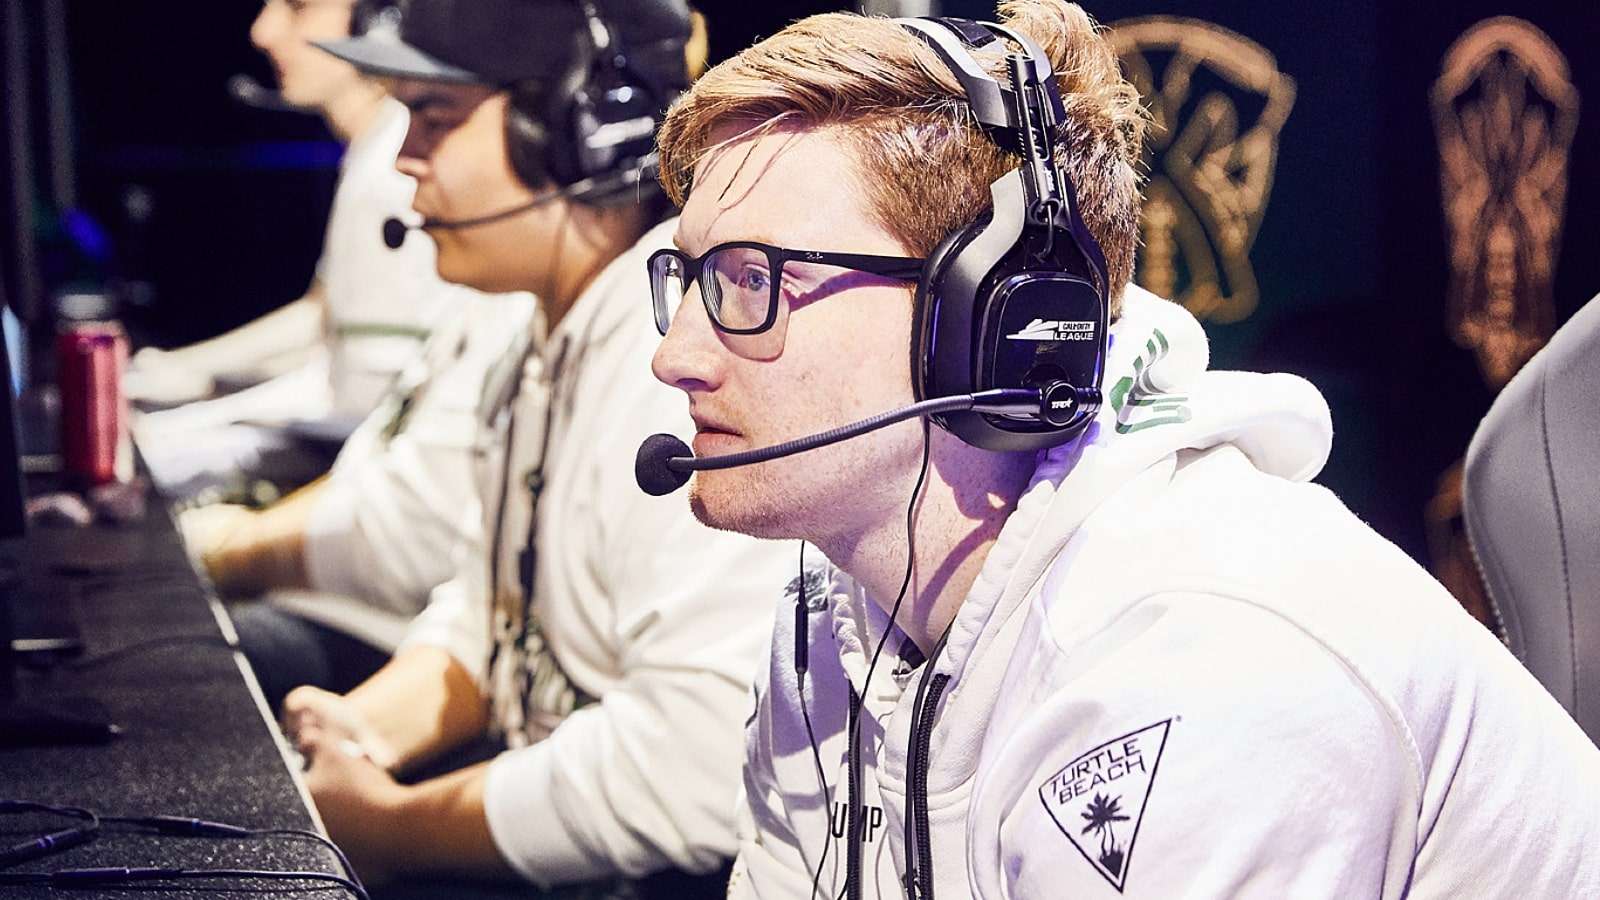 scump playing for optic chicago at cdl lan